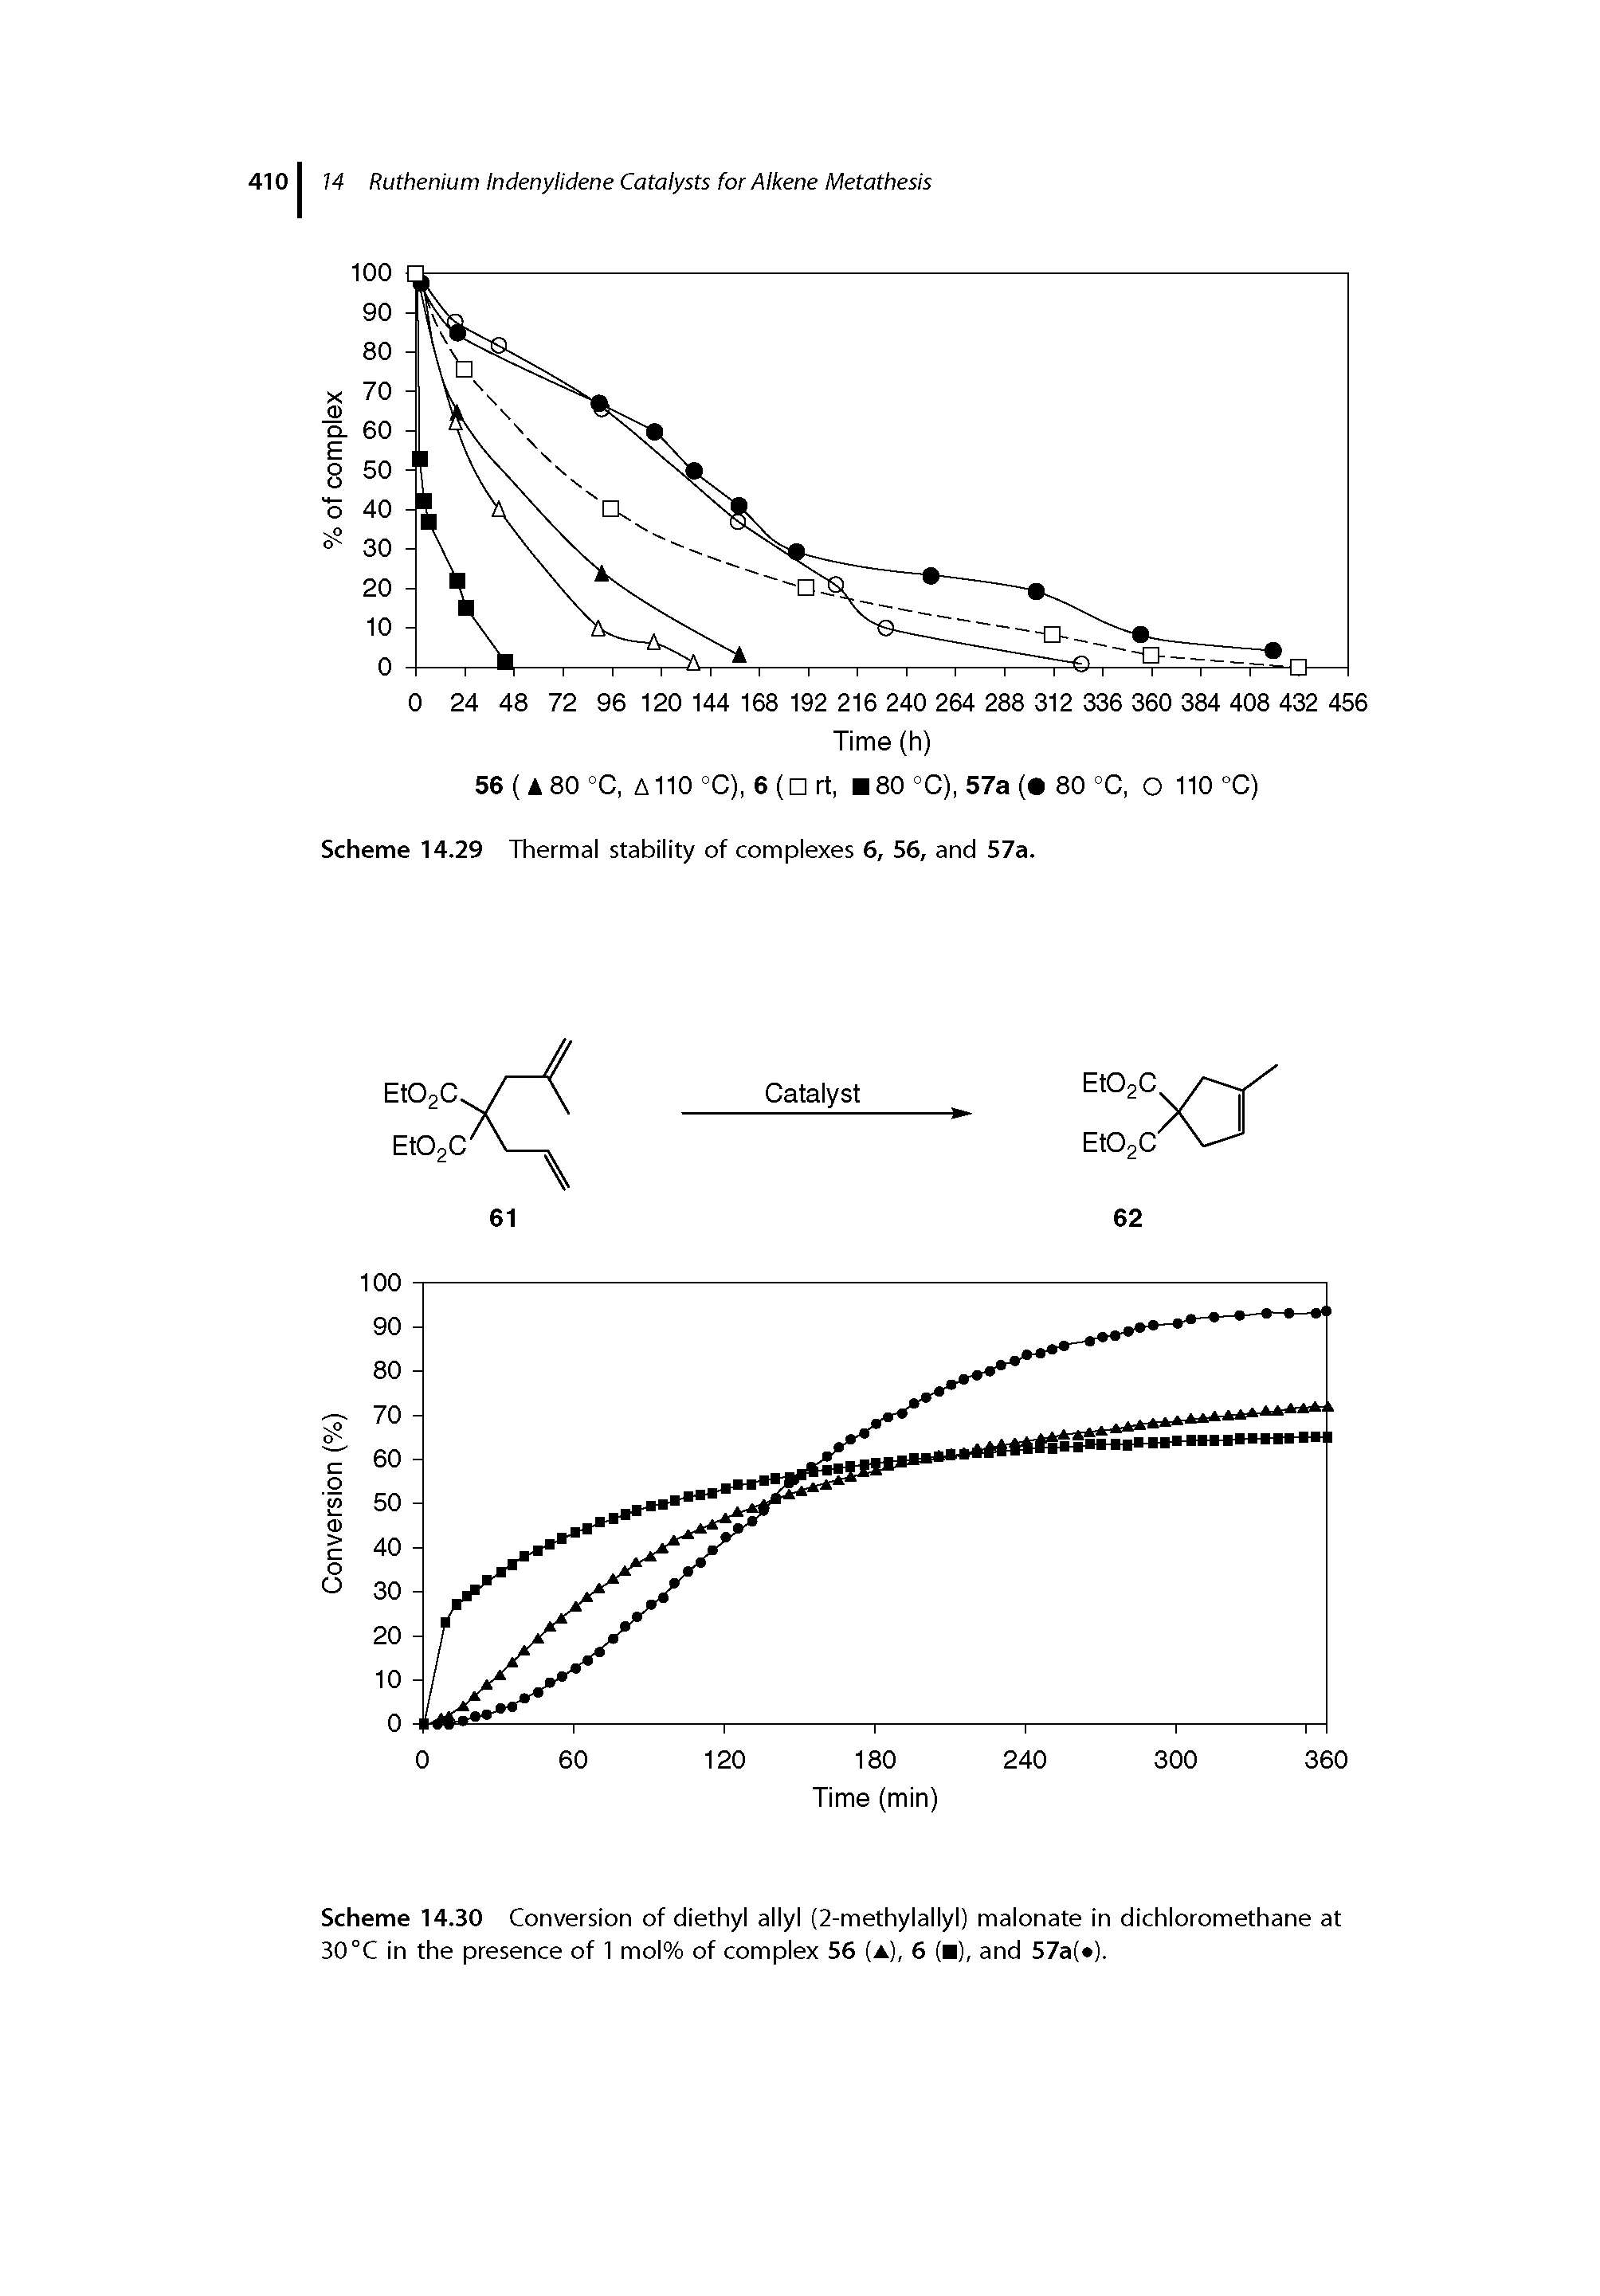 Scheme 14.30 Conversion of diethyl allyl (2-methylallyl) malonate in dichloromethane at 30°C in the presence of 1 mol% of complex 56 (a), 6 ( ), and 57a( ).